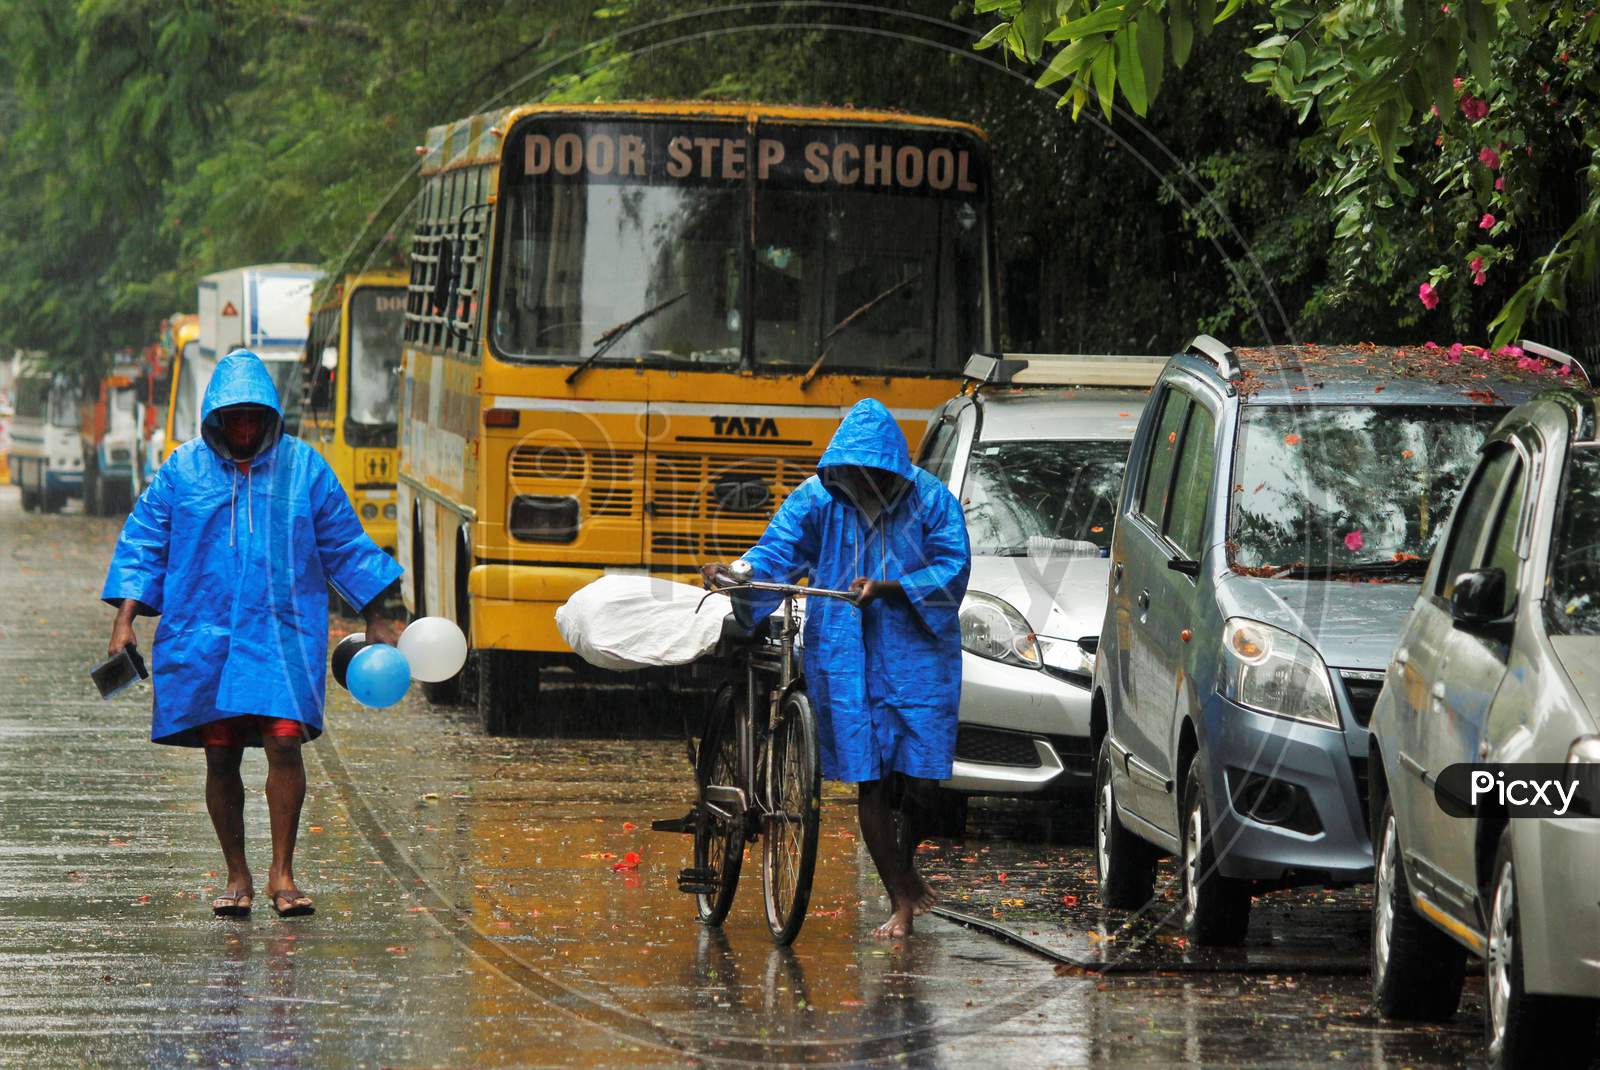 Men wearing raincoats walk on a street on a rainy day, after cyclone Nisarga made its landfall on the outskirts of the city, in Mumbai, India, June, 3, 2020.